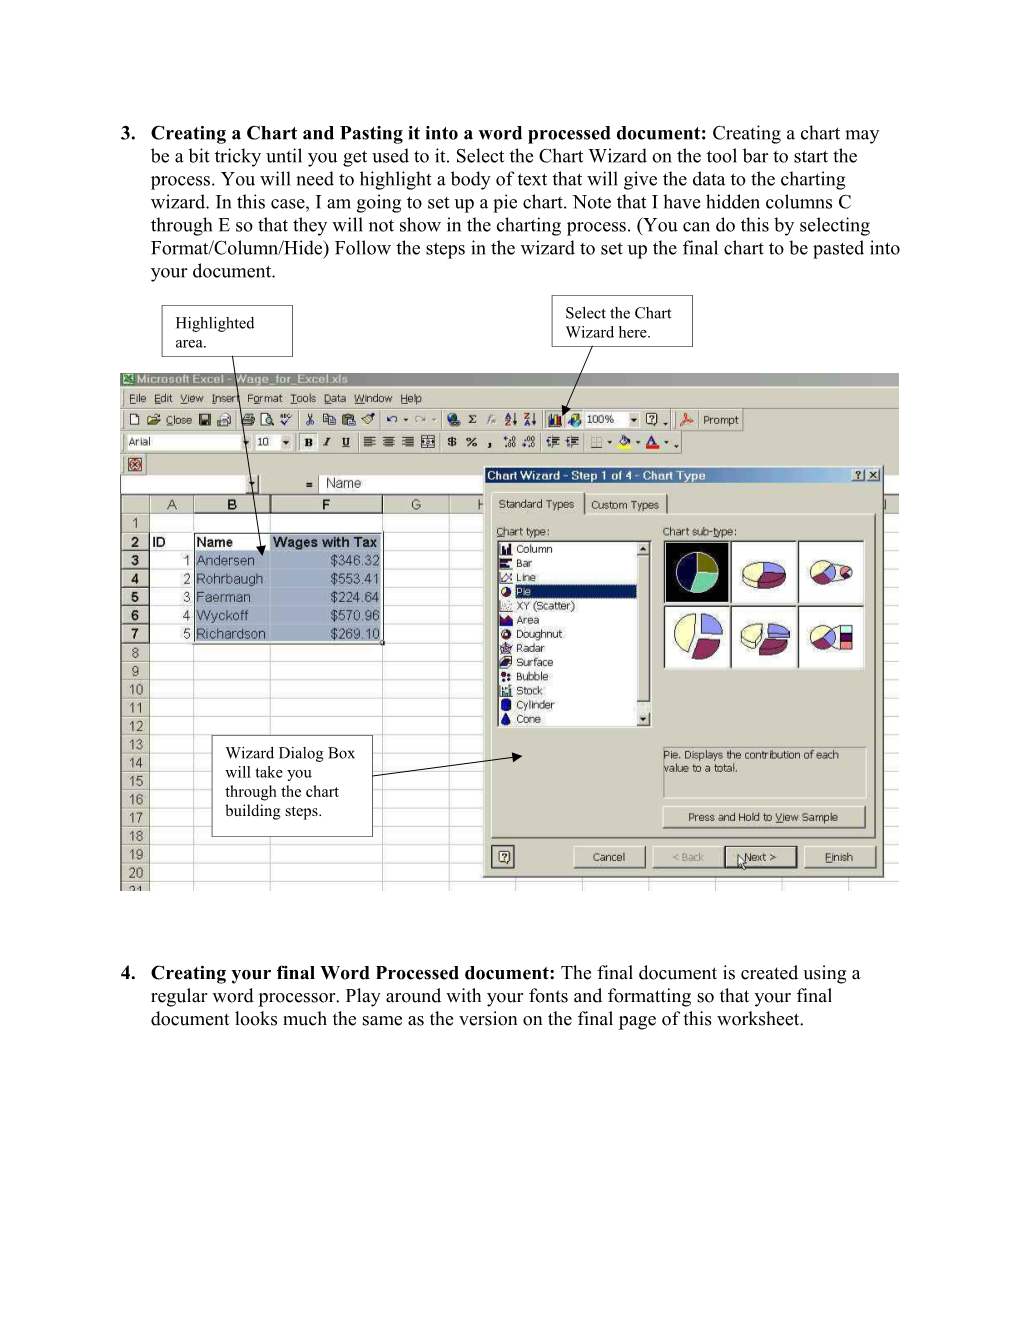 Worksheet: Word Processing and Spreadsheets